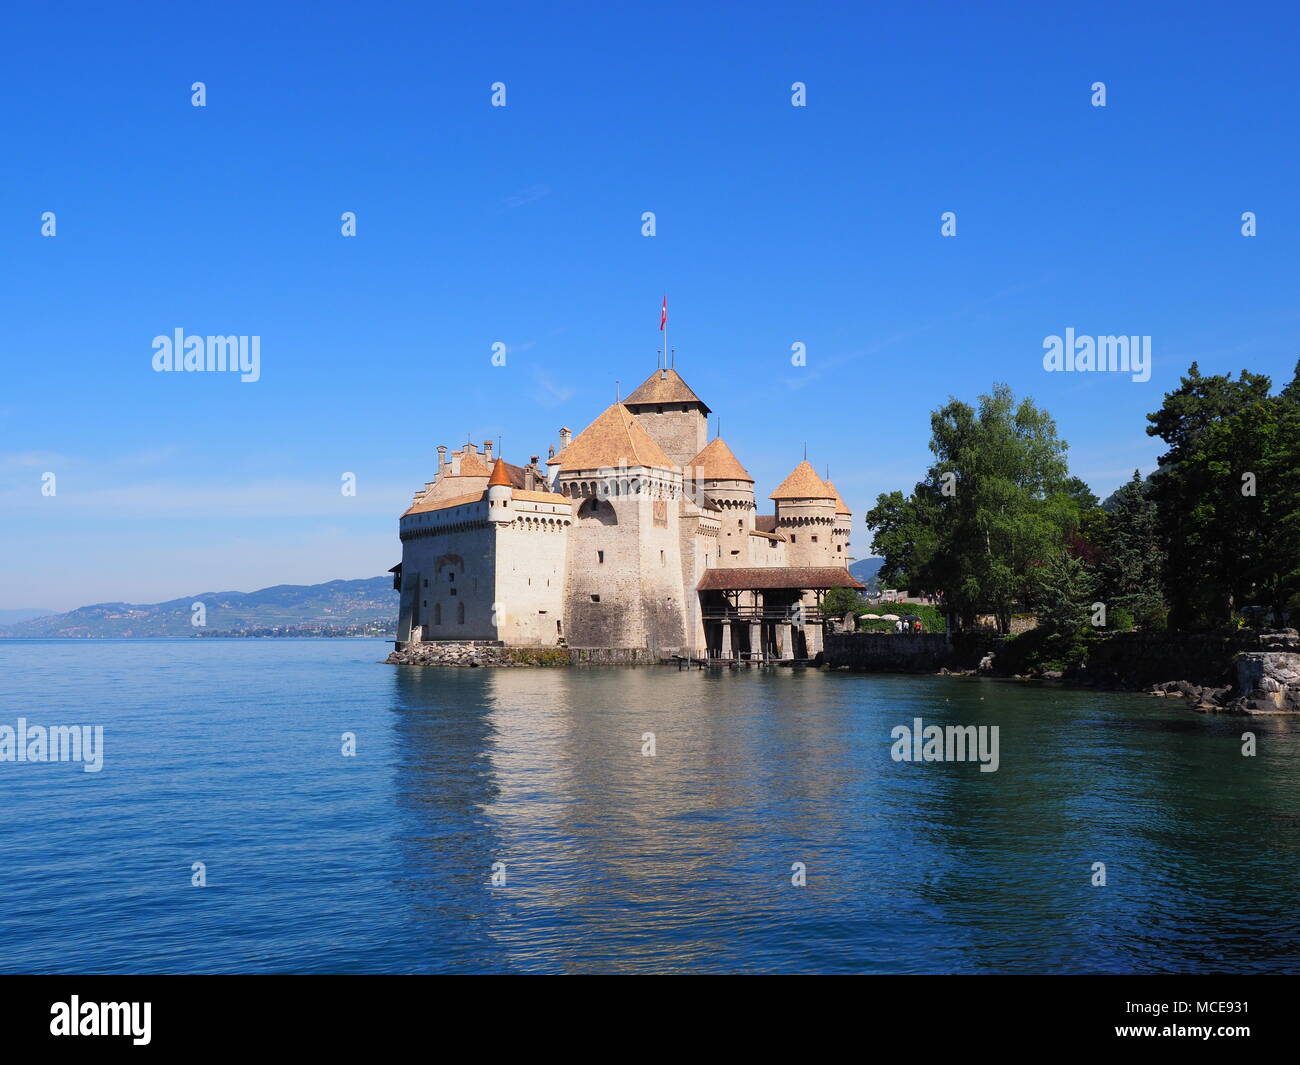 View of medieval Chateau de Chillon castle at Lake Geneva in Montreux city, Canton of Vaud in Switzerland, landscapes of alpine Lac Leman, clear blue  Stock Photo